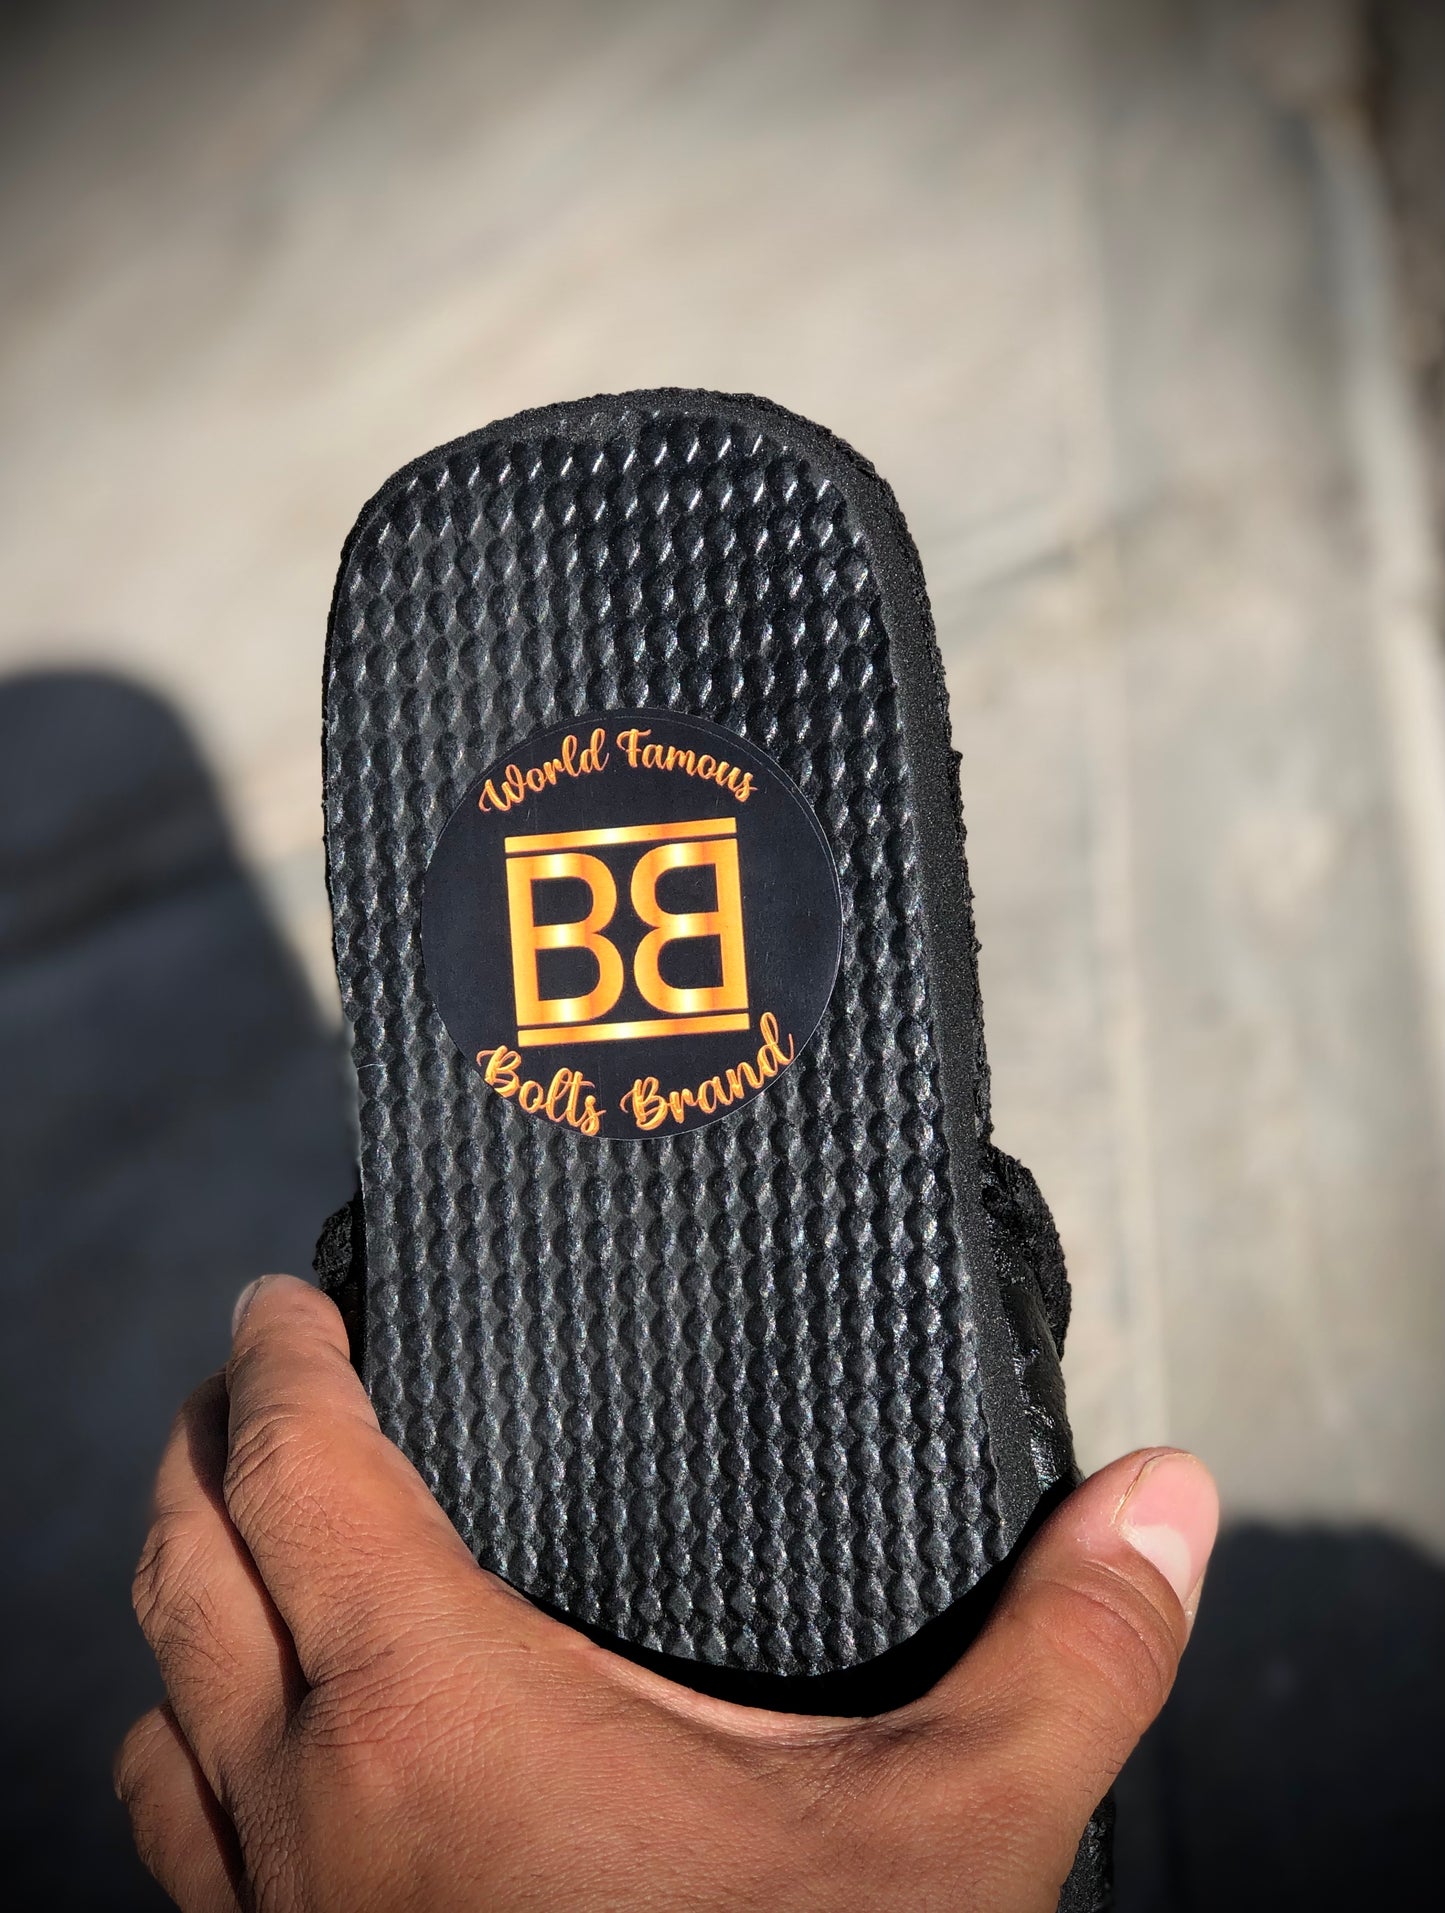 BB Blacked out slippers